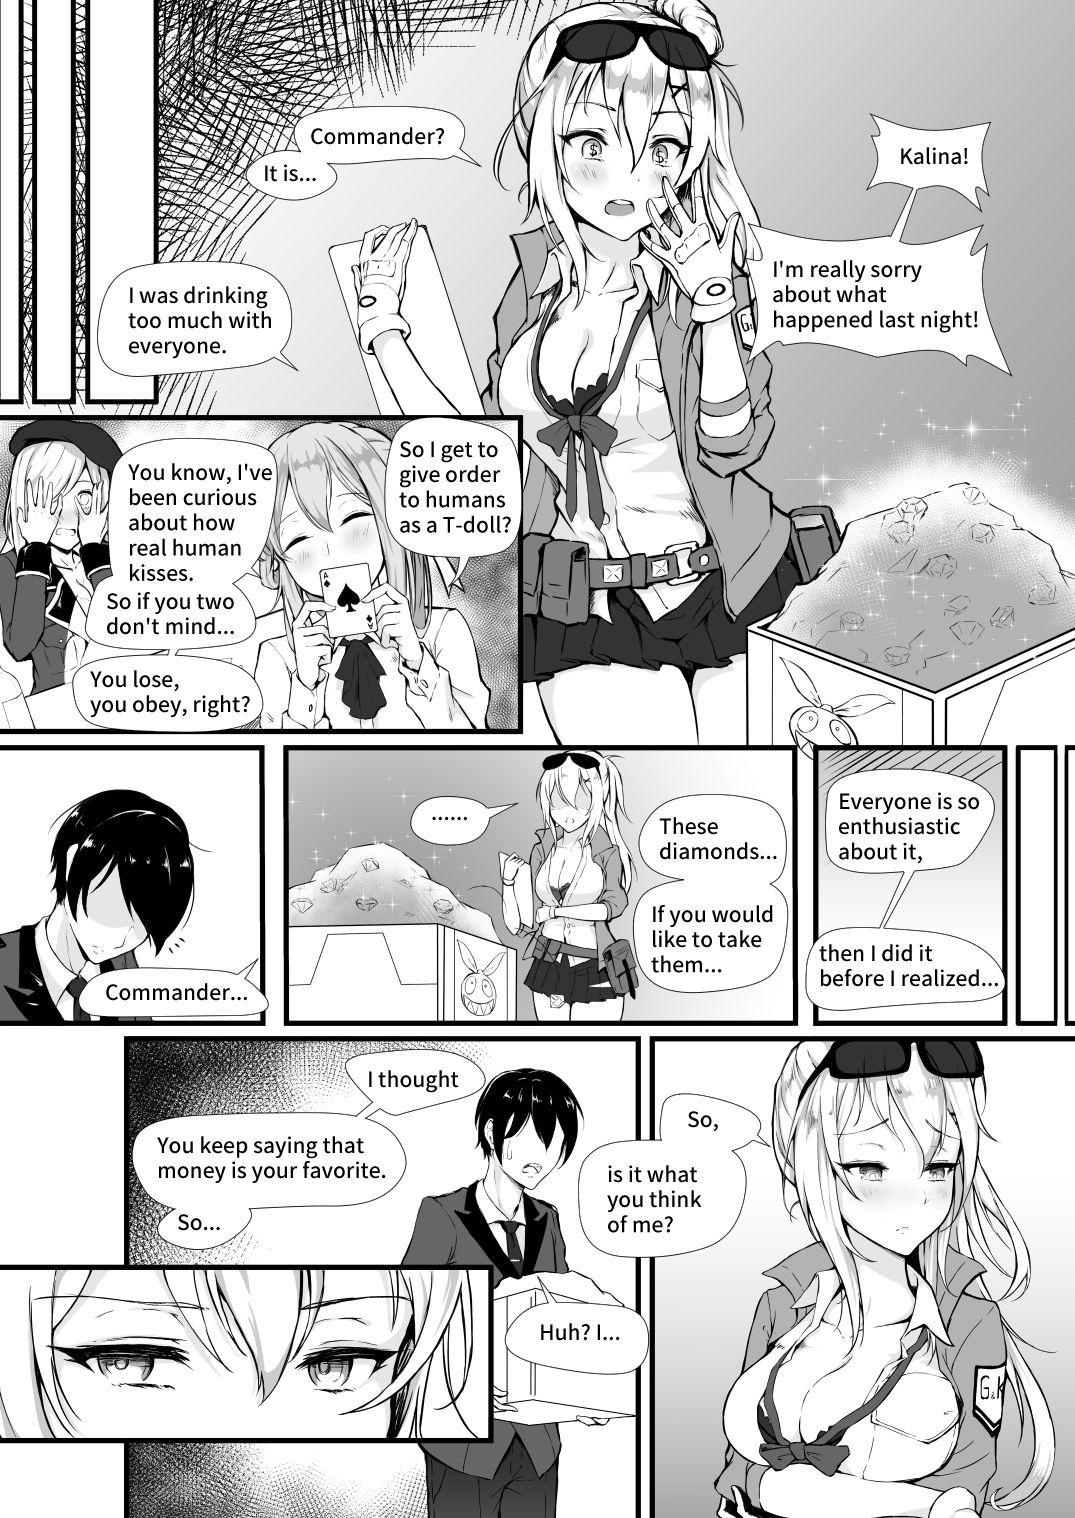 Indian Sex How Many Diamonds a Kiss Worth? - Girls frontline Asia - Page 5